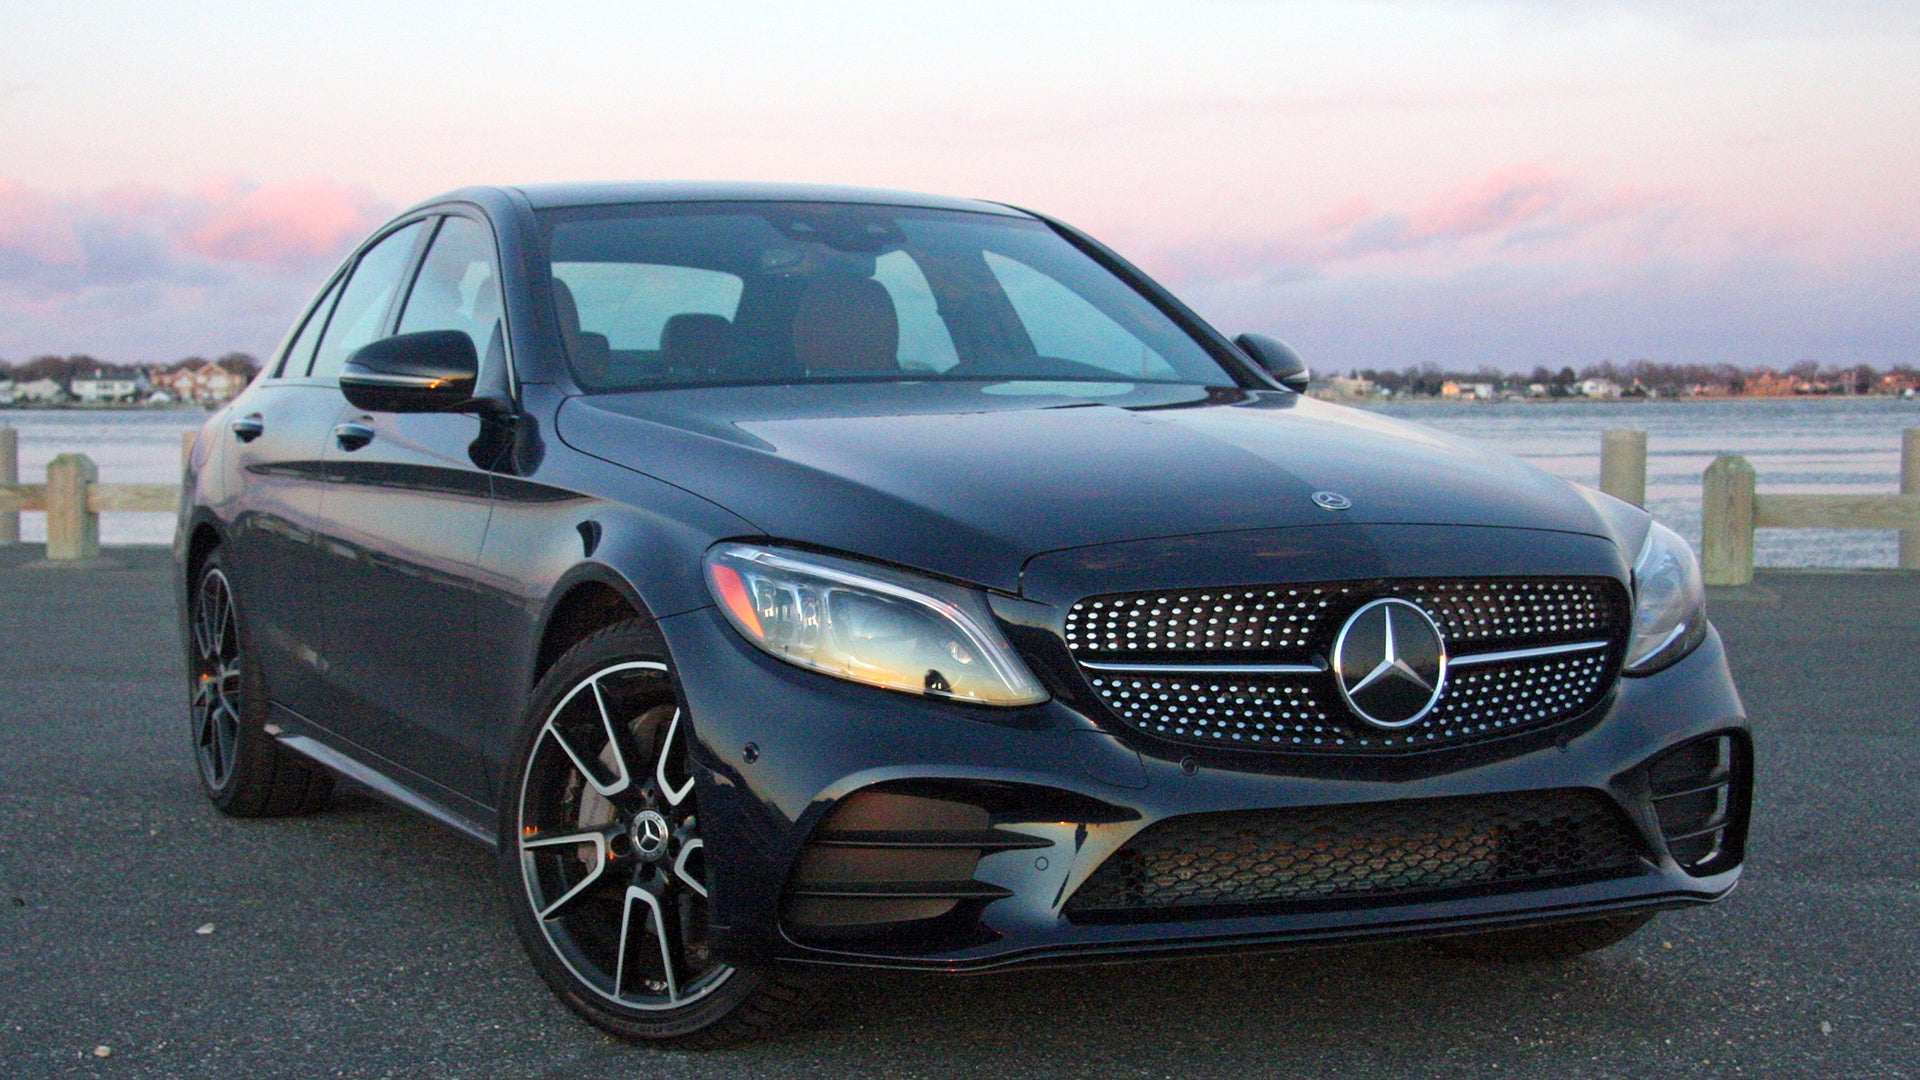 2019 Mercedes-Benz C300 4Matic Sedan New Dad Review: What Good Is ...